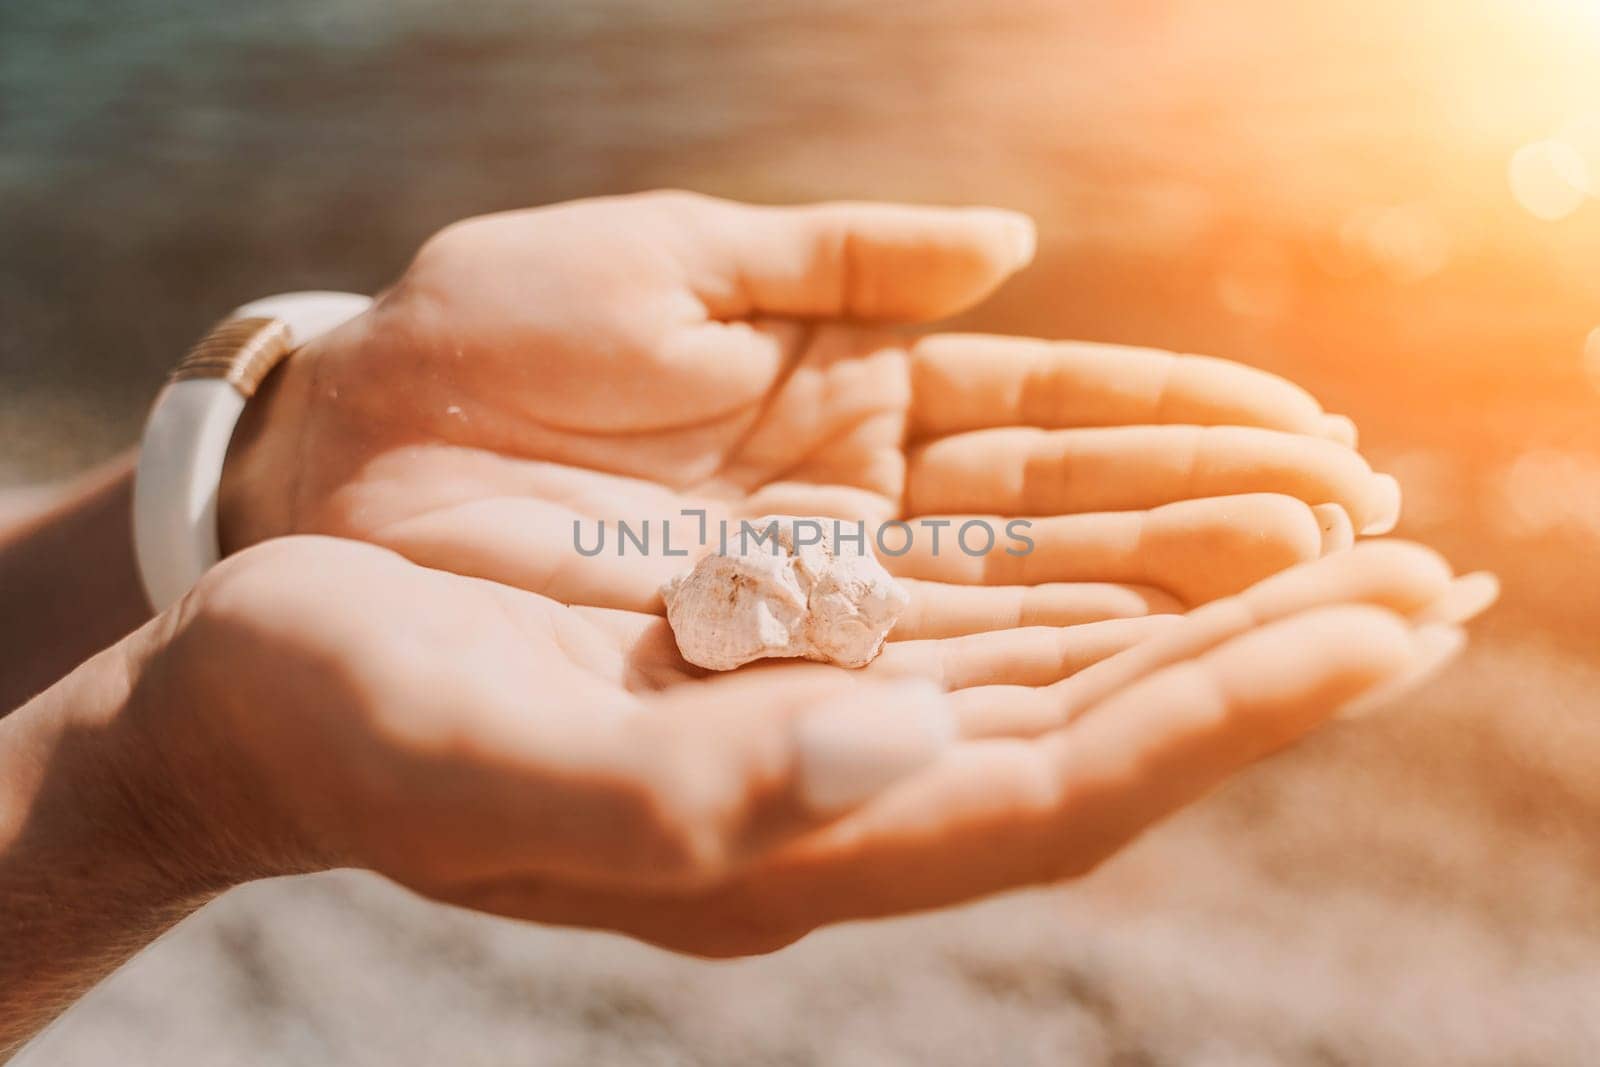 Beach vacation snapshot: A woman in a swimsuit holding a pebble in her hands, enjoying the serenity of the beach and the beauty of nature, creating a peaceful and relaxing atmosphere